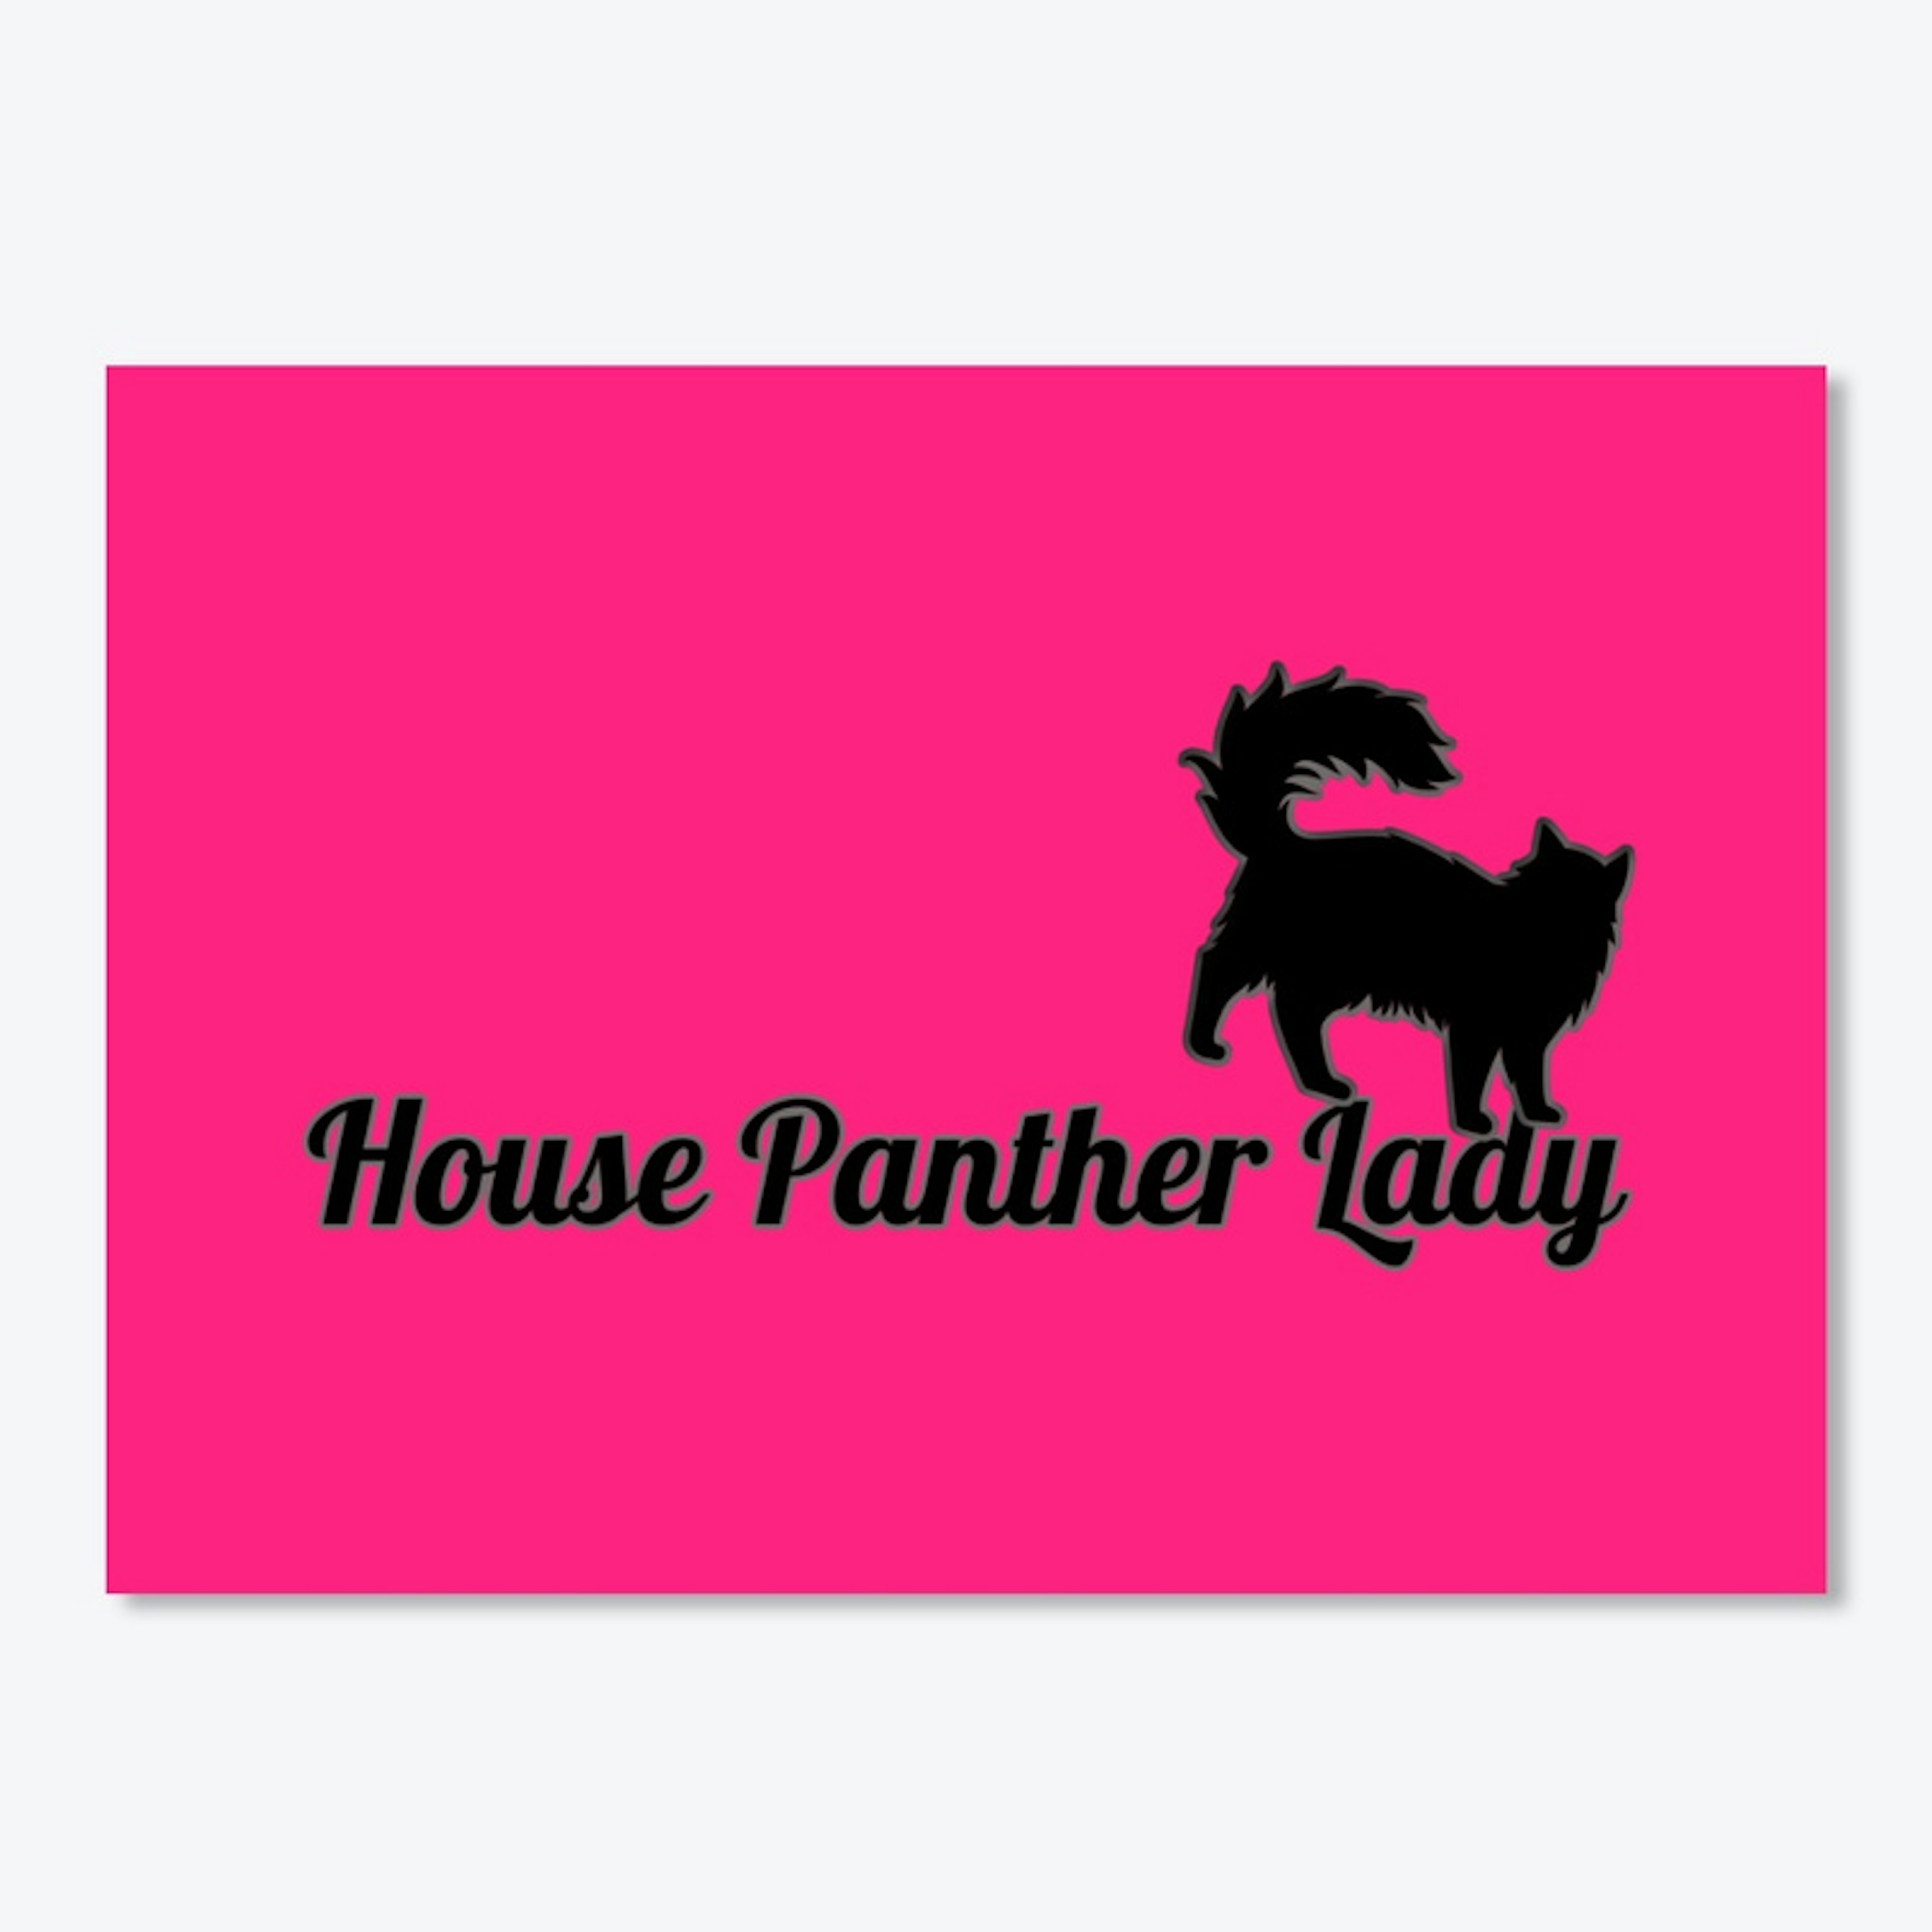 House Panther Lady